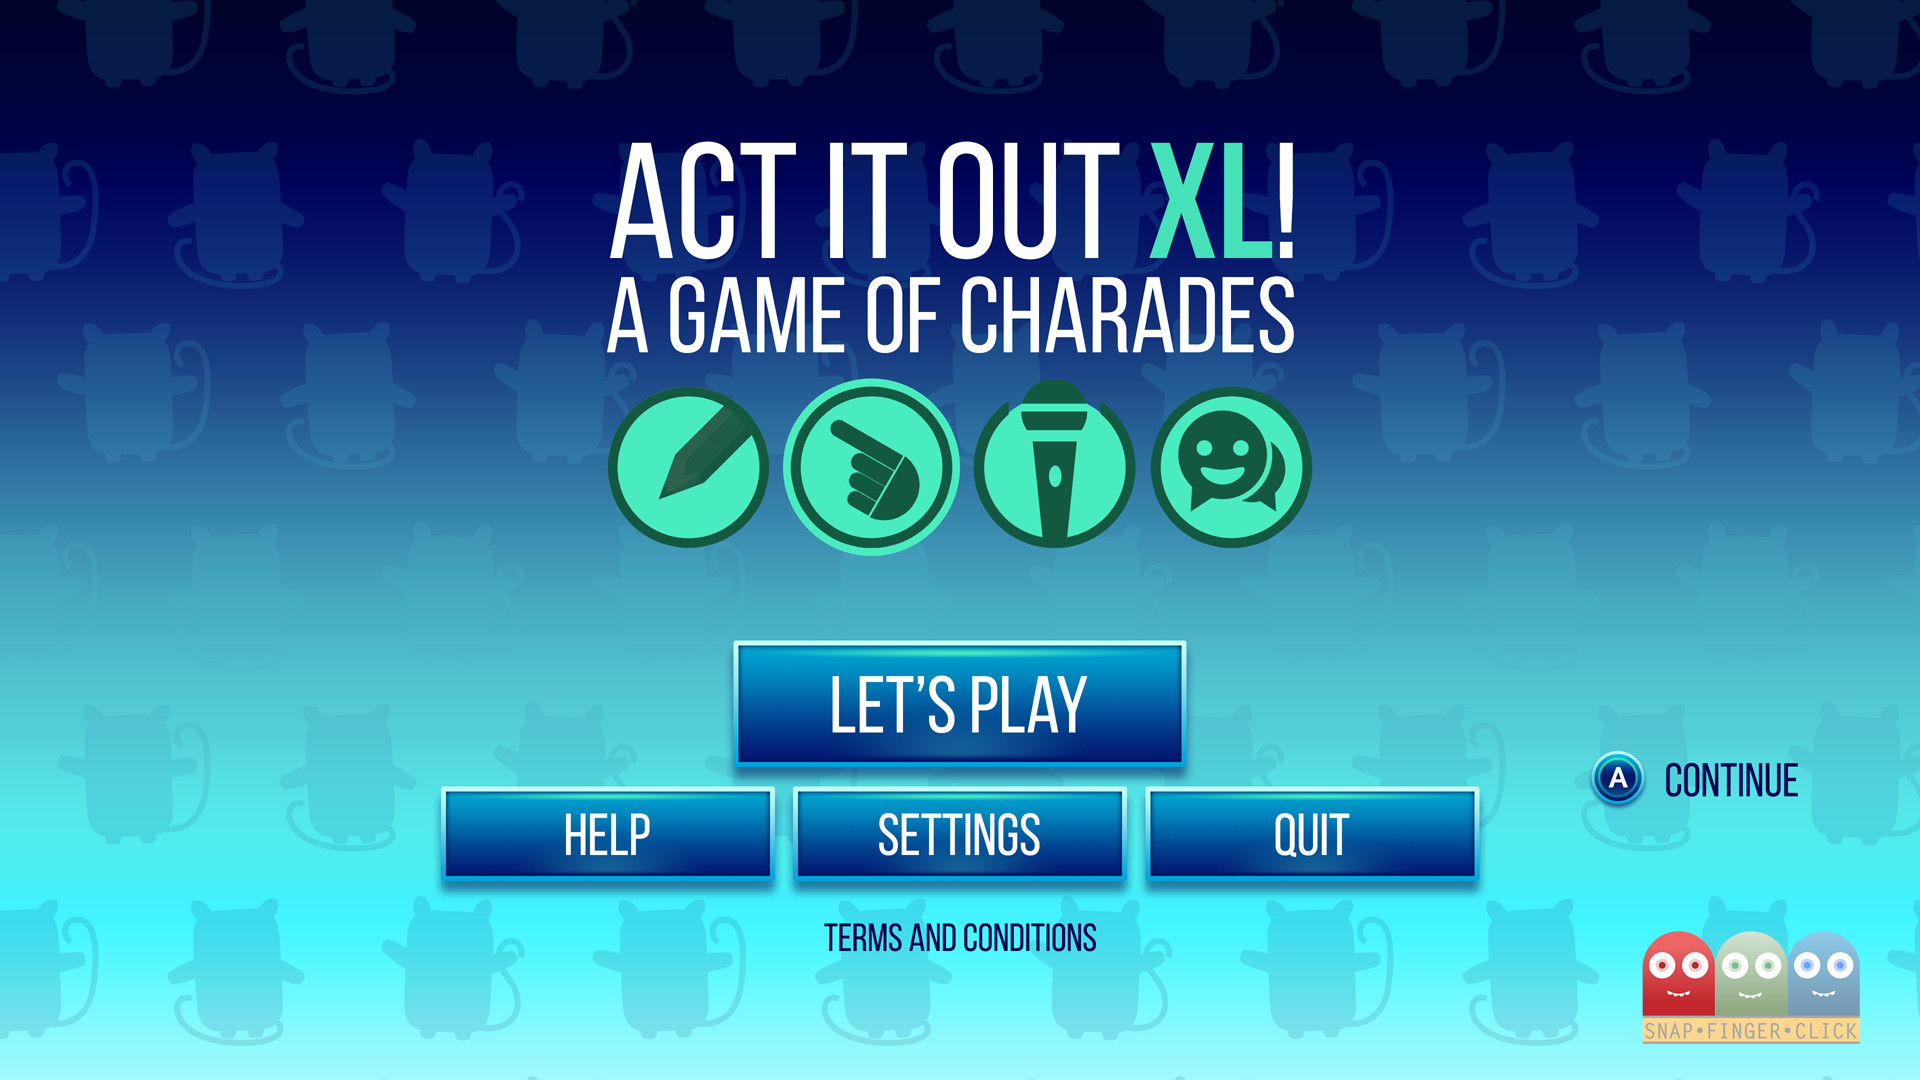 ACT IT OUT XL! A Game of Charades - Designed for Twitch screenshot